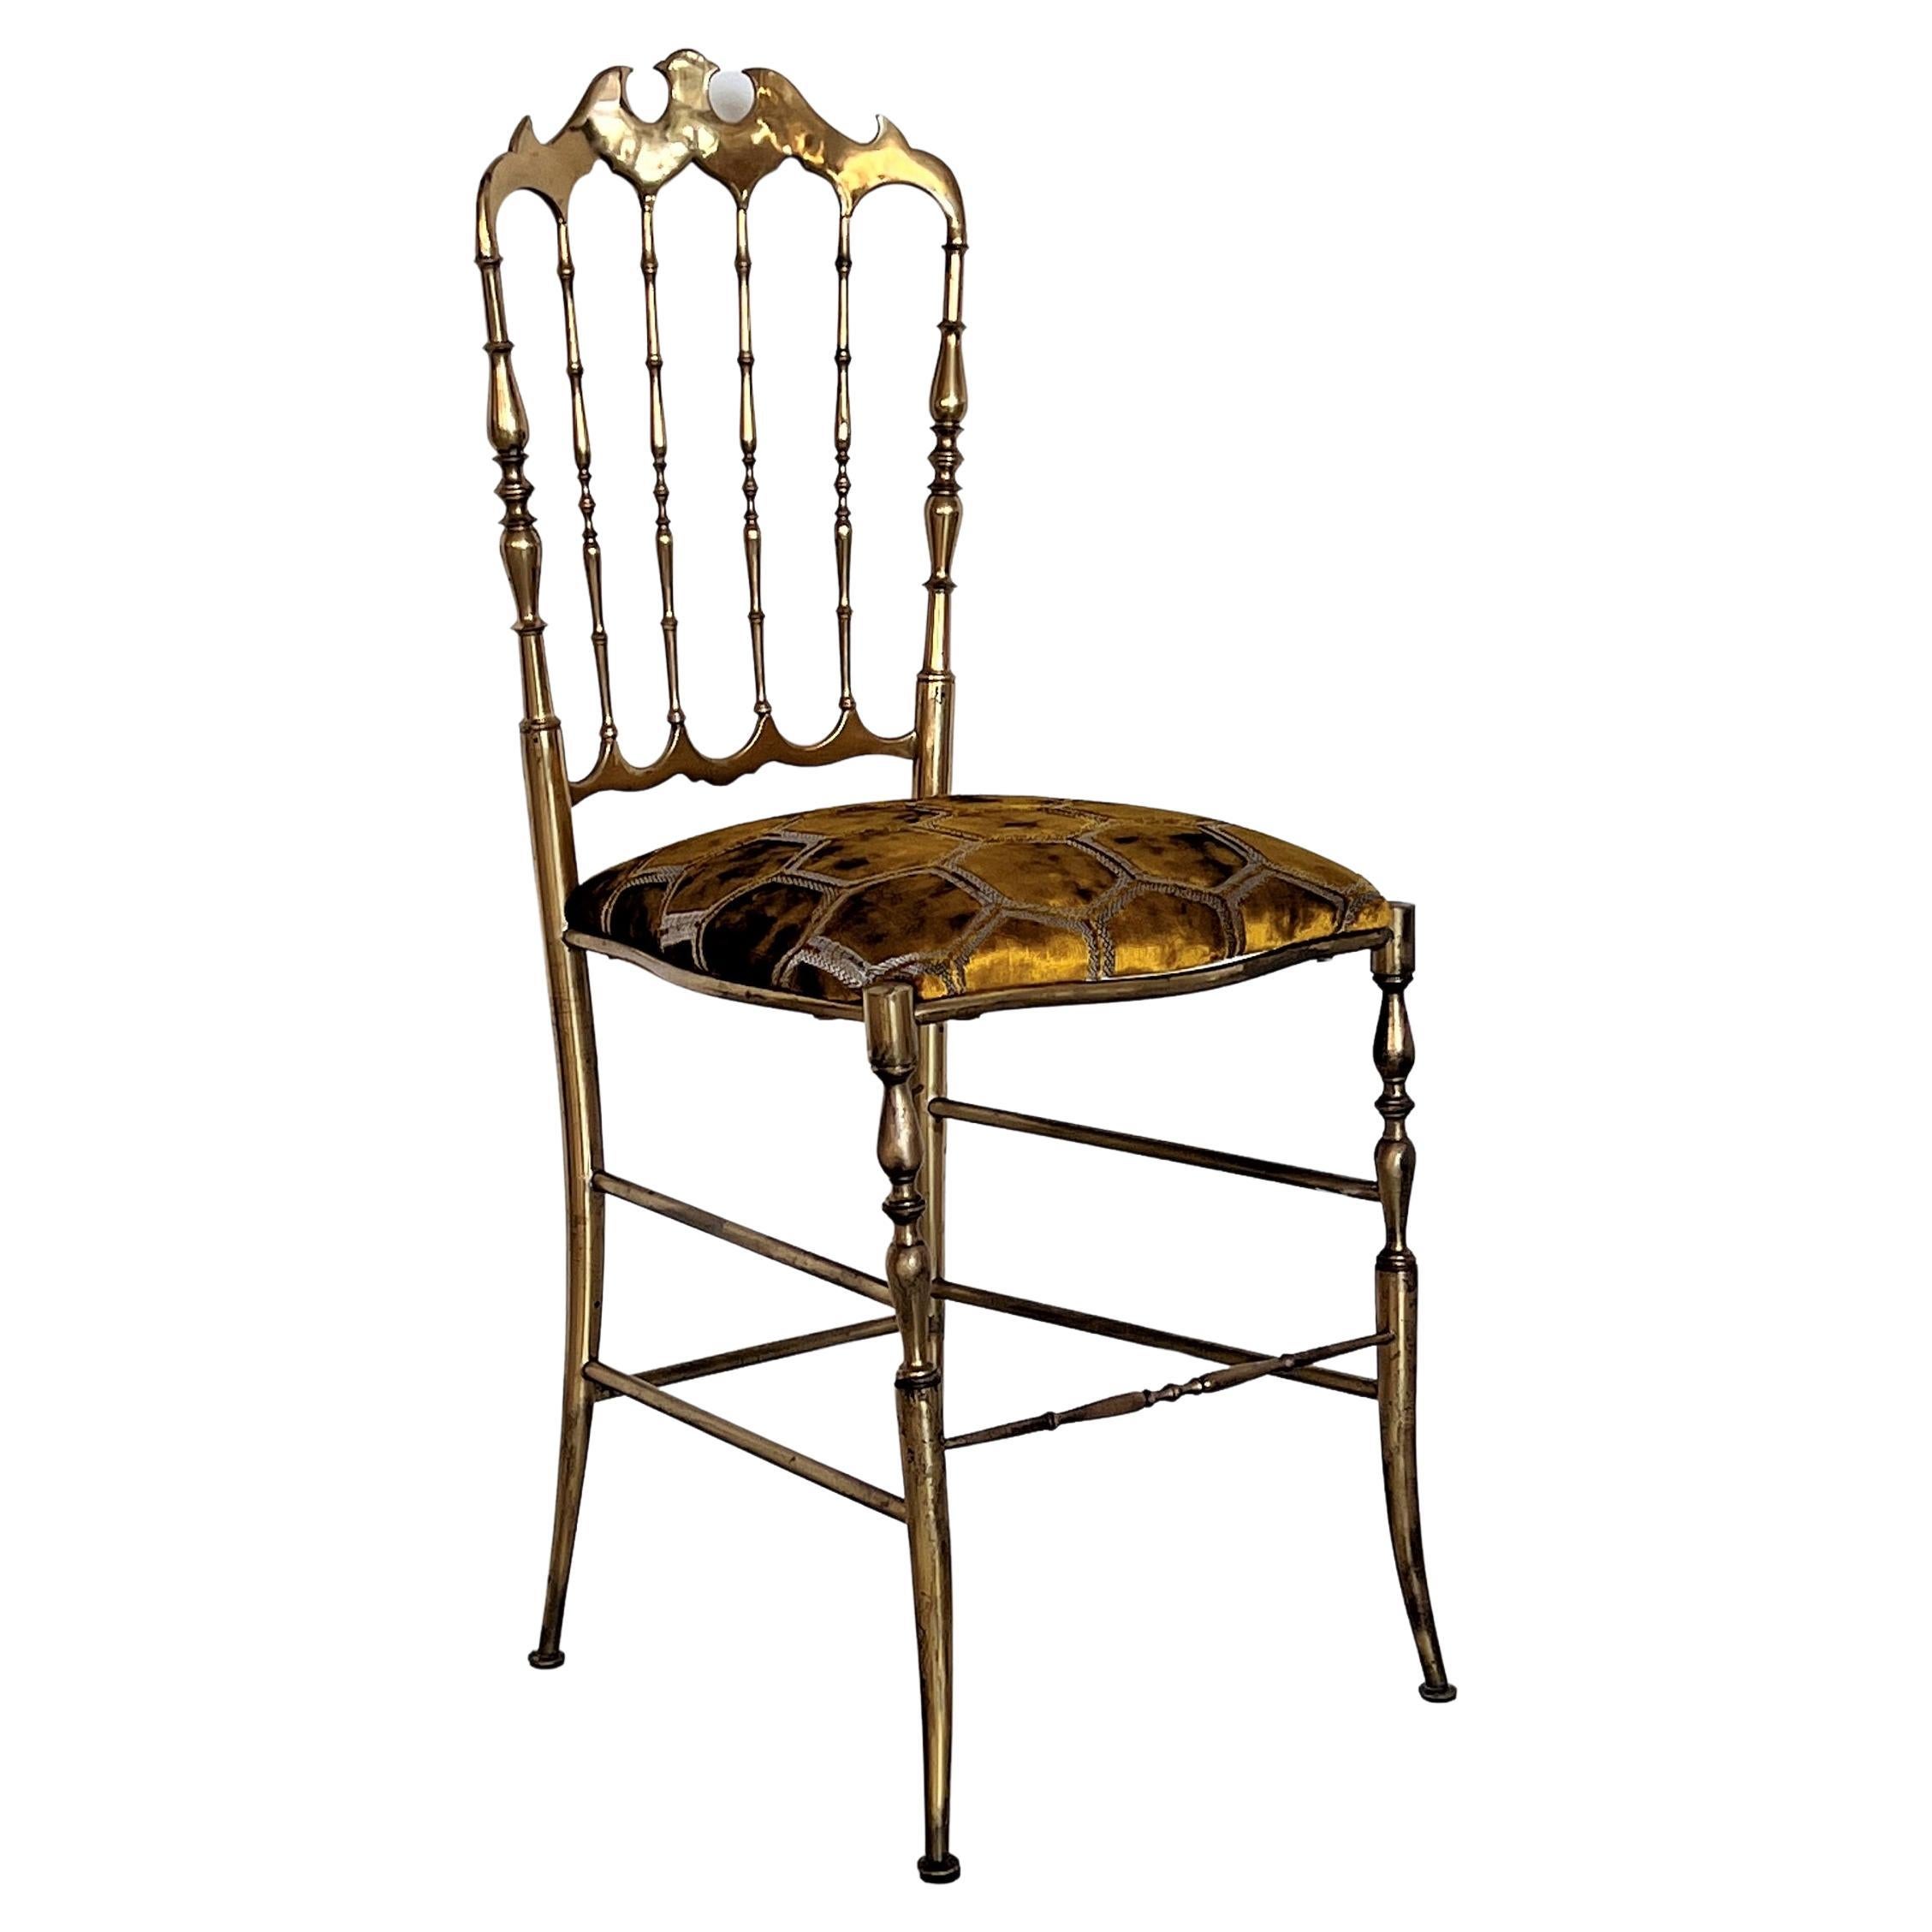 Italian Mid-Century Chiavari Chair in Full Brass with New Upholstery, 1970s For Sale